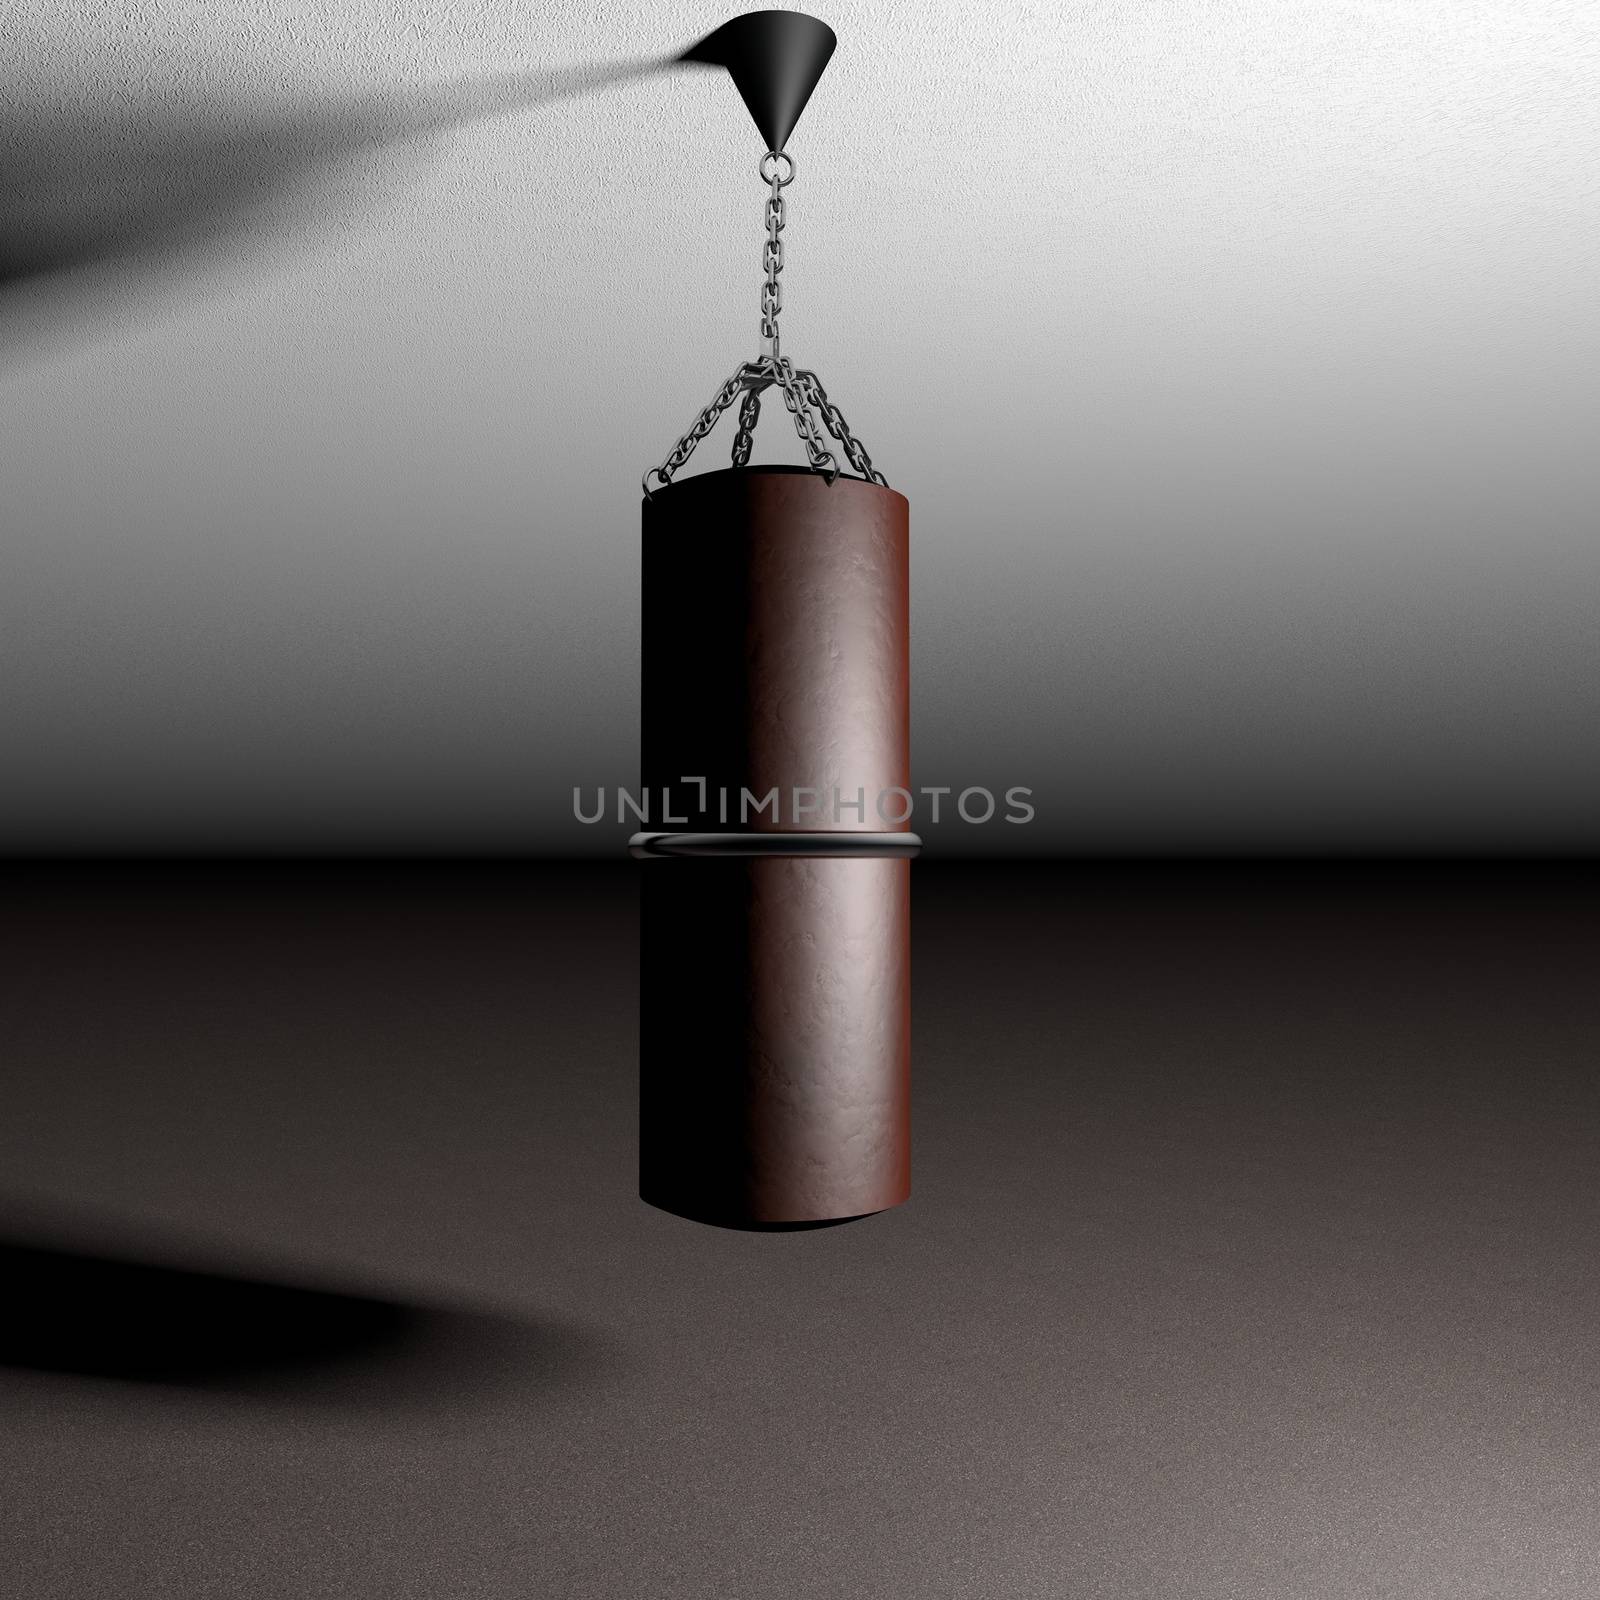 Boxing bag pending from ceiling, 3d render